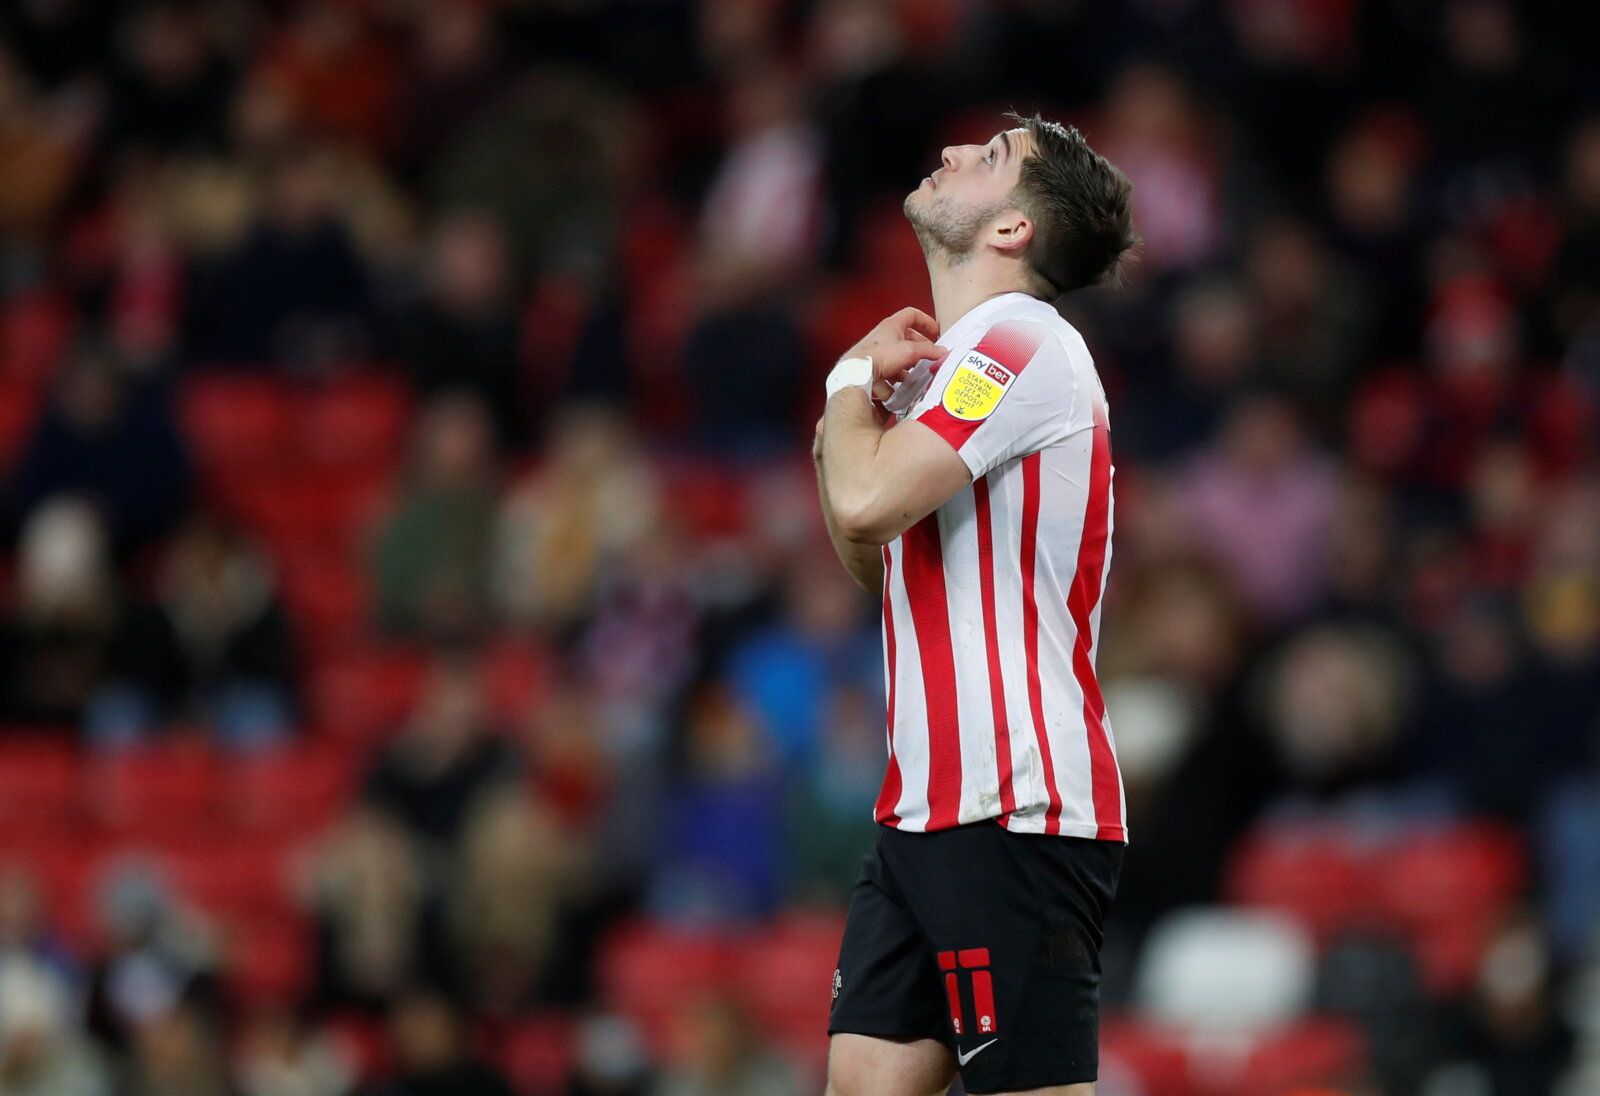 Soccer Football - EFL Trophy - Group Stage - Sunderland v Bradford City - Stadium of Light, Sunderland, Britain - November 9, 2021  Sunderland's Lynden Gooch reacts after missing penalty in shoot-out  Action Images/Lee Smith  EDITORIAL USE ONLY. No use with unauthorized audio, video, data, fixture lists, club/league logos or "live" services. Online in-match use limited to 75 images, no video emulation. No use in betting, games or single club/league/player publications.  Please contact your accou